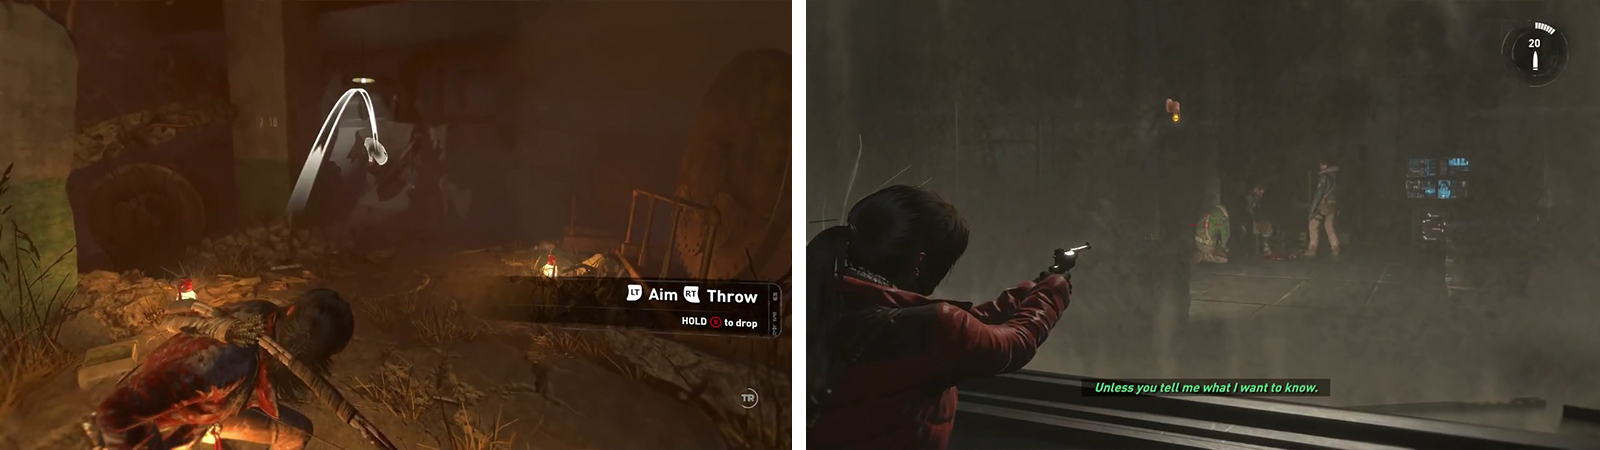 Use a lantern to destroy the canvas blockage (left). In the next room, Lara will grab a gun, use this to shoot the enemies through the glass (right).